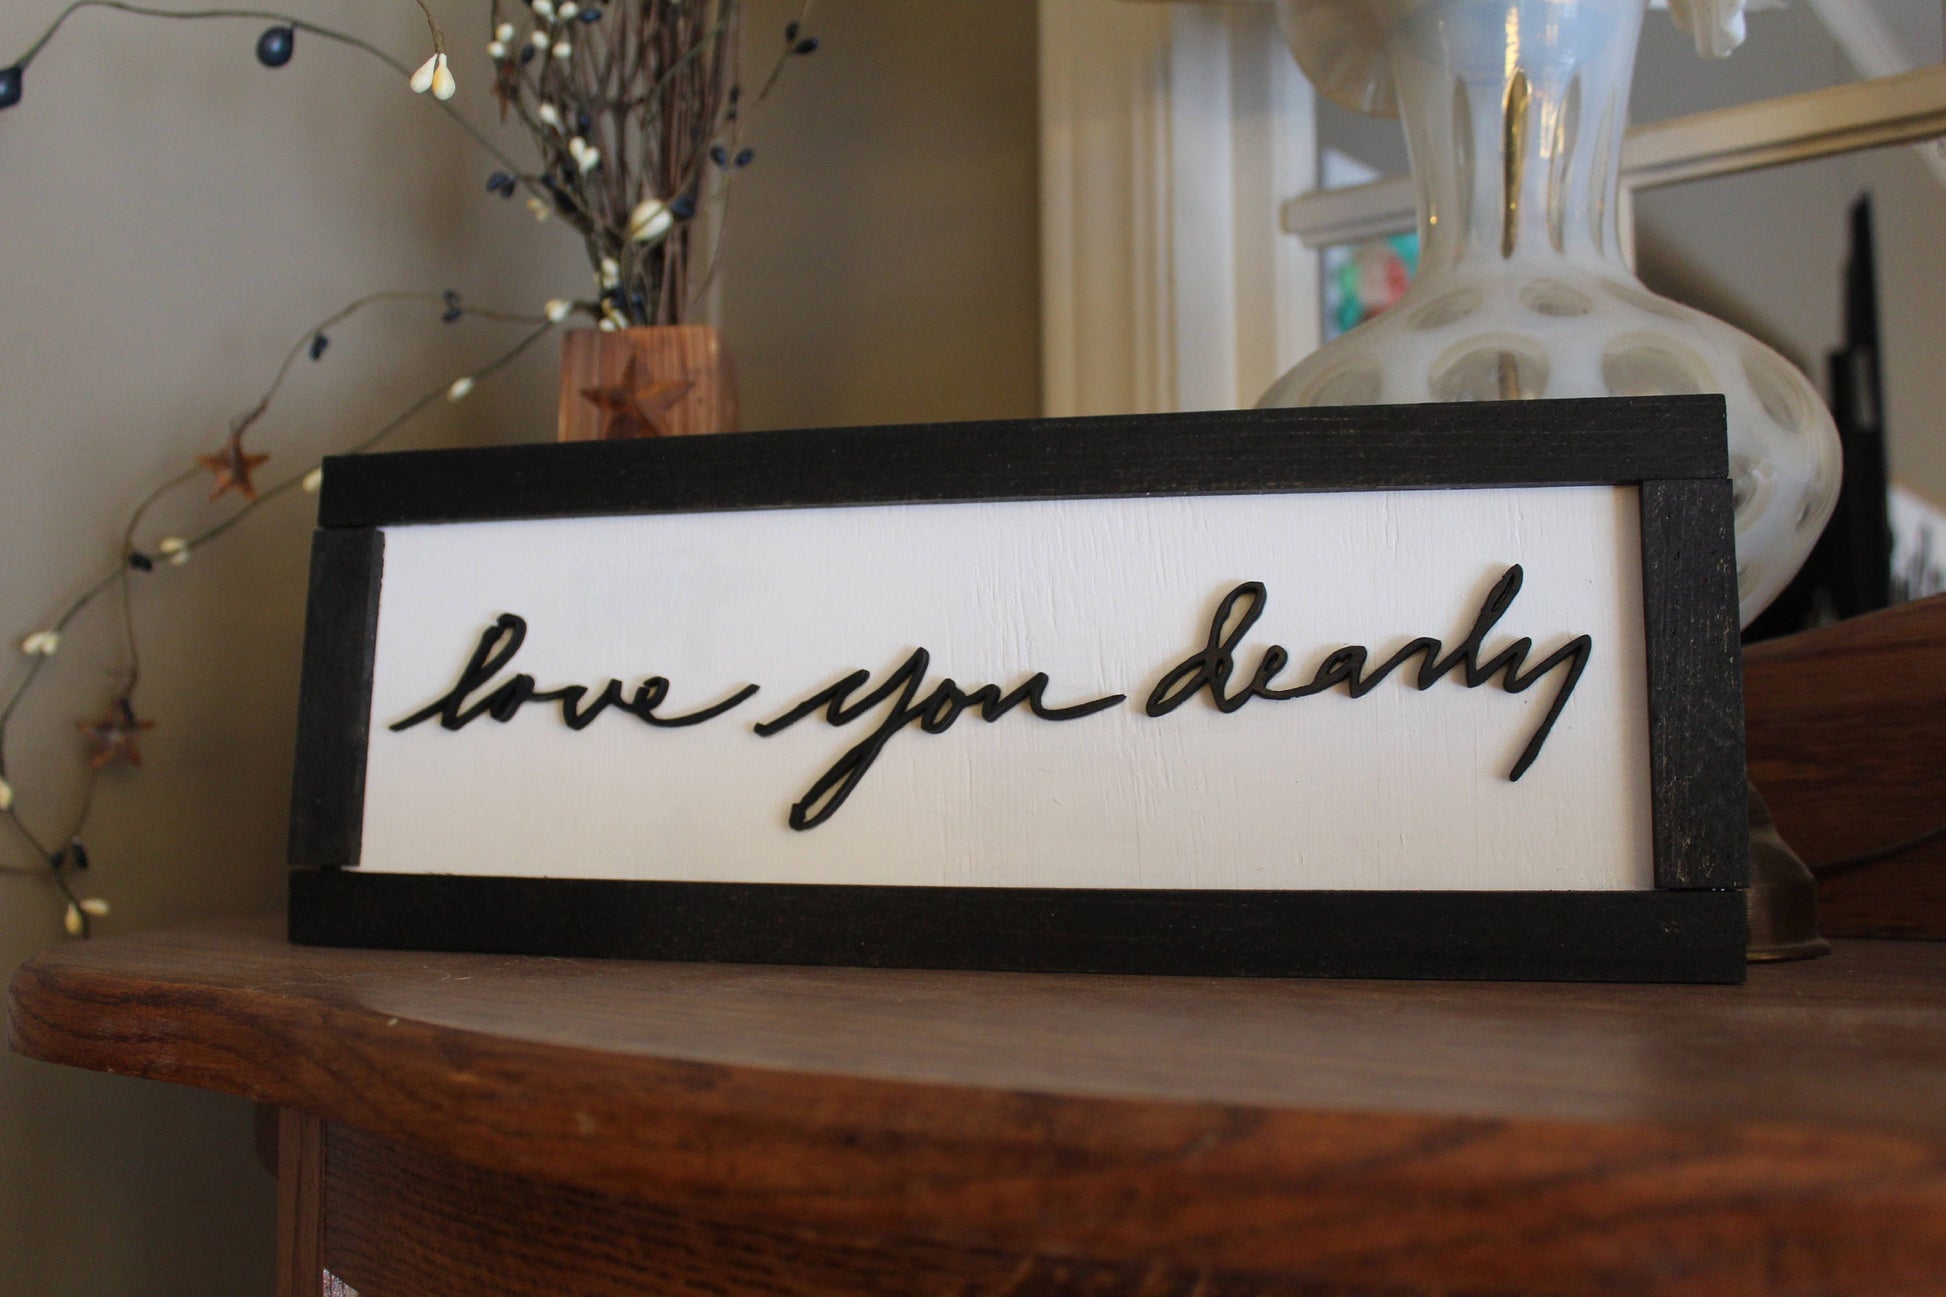 custom handwriting, gift sign decor wooden my handwriting from photo cut from wood framed loved one note great mother's day father's day